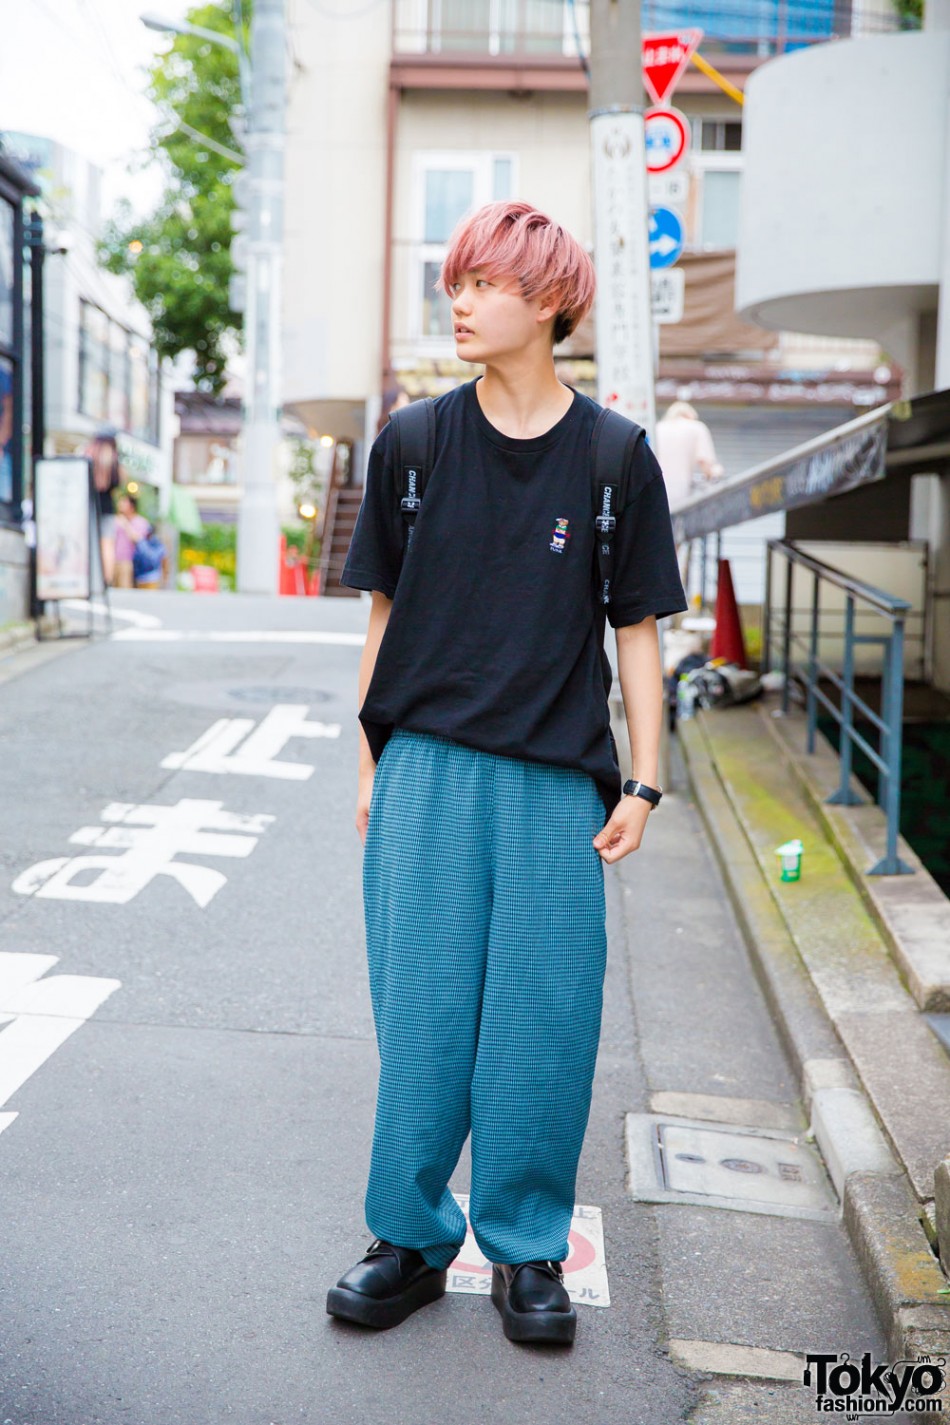 Pink Haired Harajuku Guy In Minimalist Street Style w/ Chance Chance ...